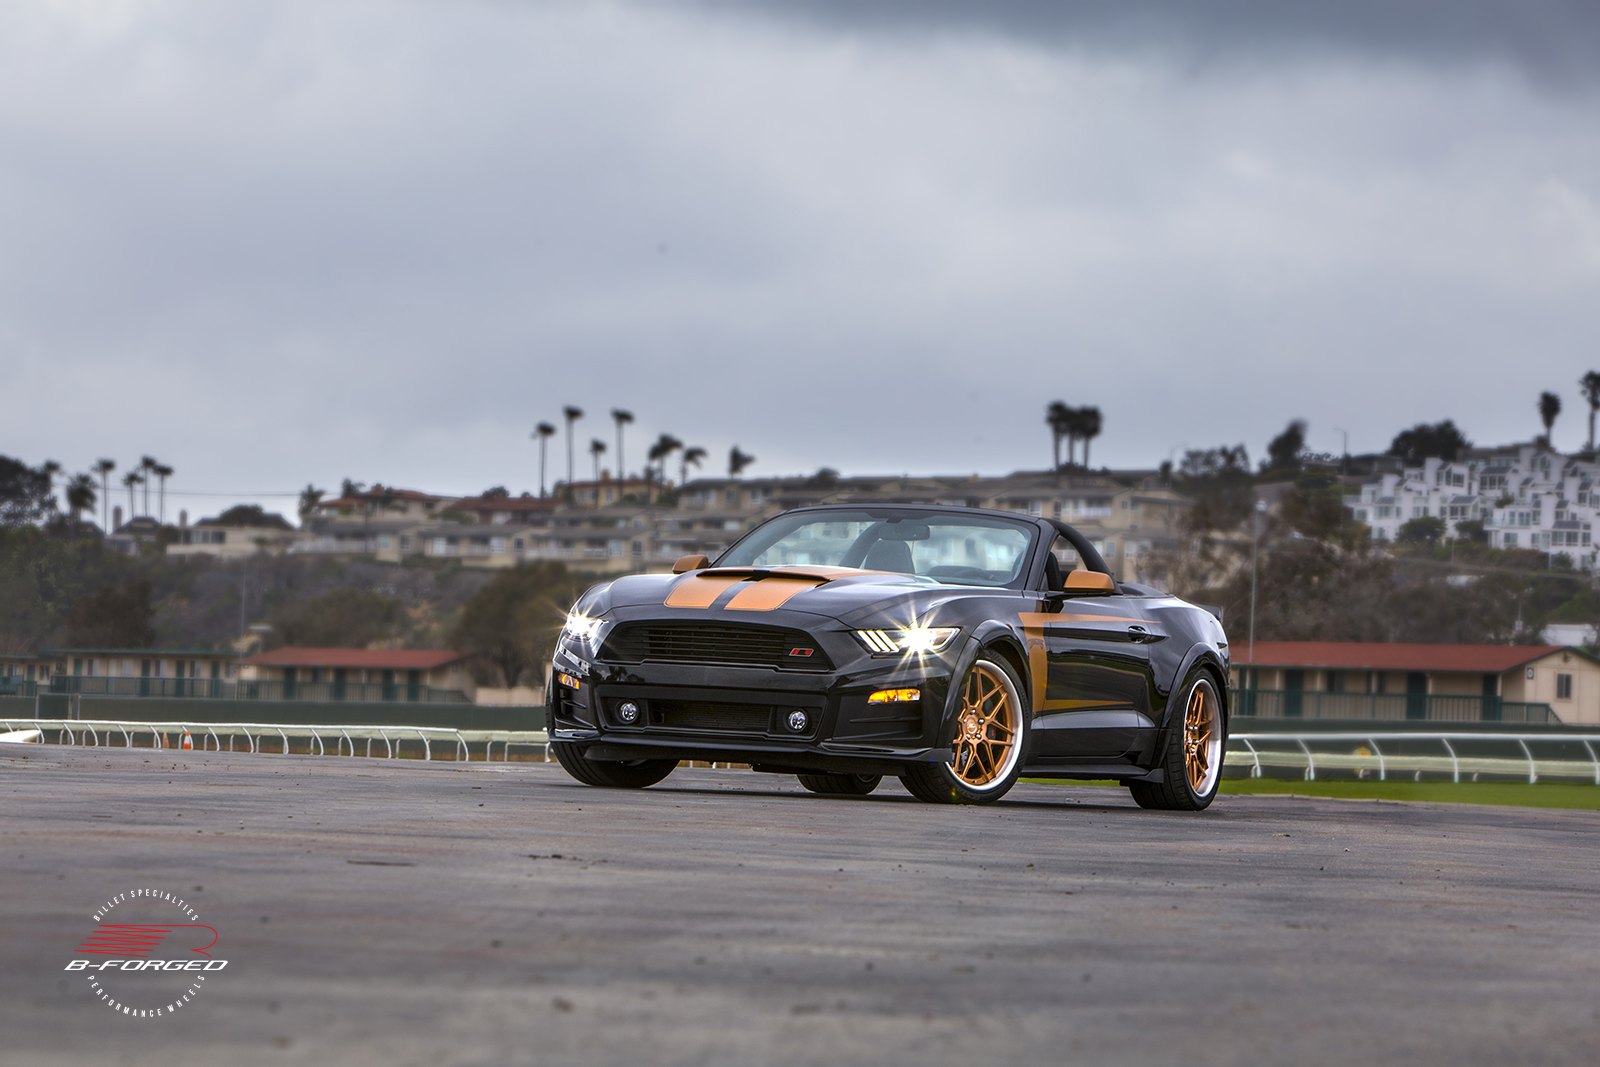 Custom Vented Hood on Black Convertible Ford Mustang - Photo by B-Forged Performance Wheels